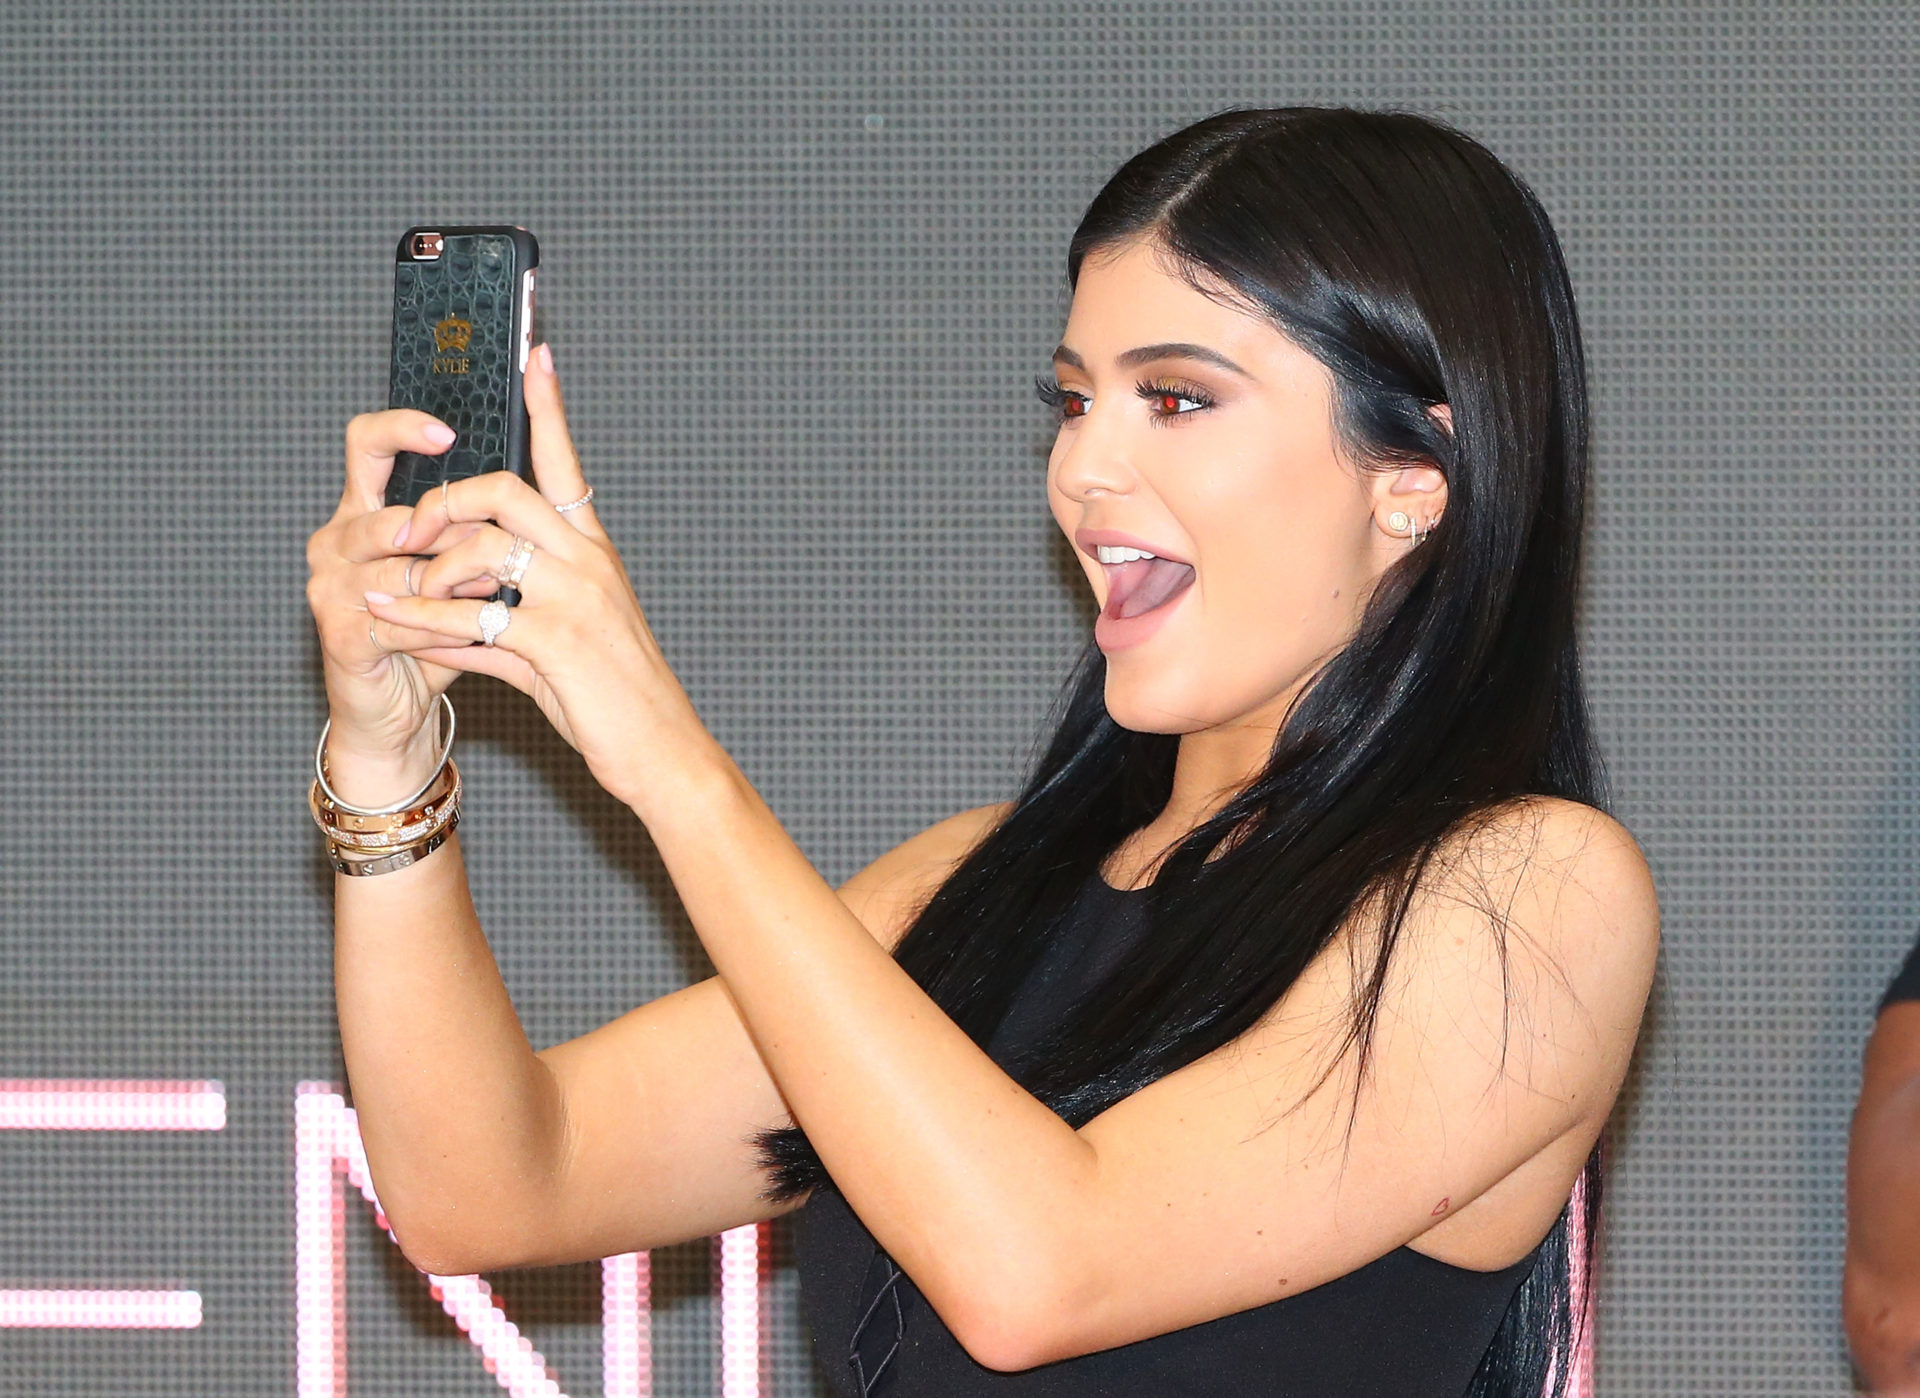 Kylie Jenner fans cruelly mock her makeup by asking if ‘Stormi was behind it’